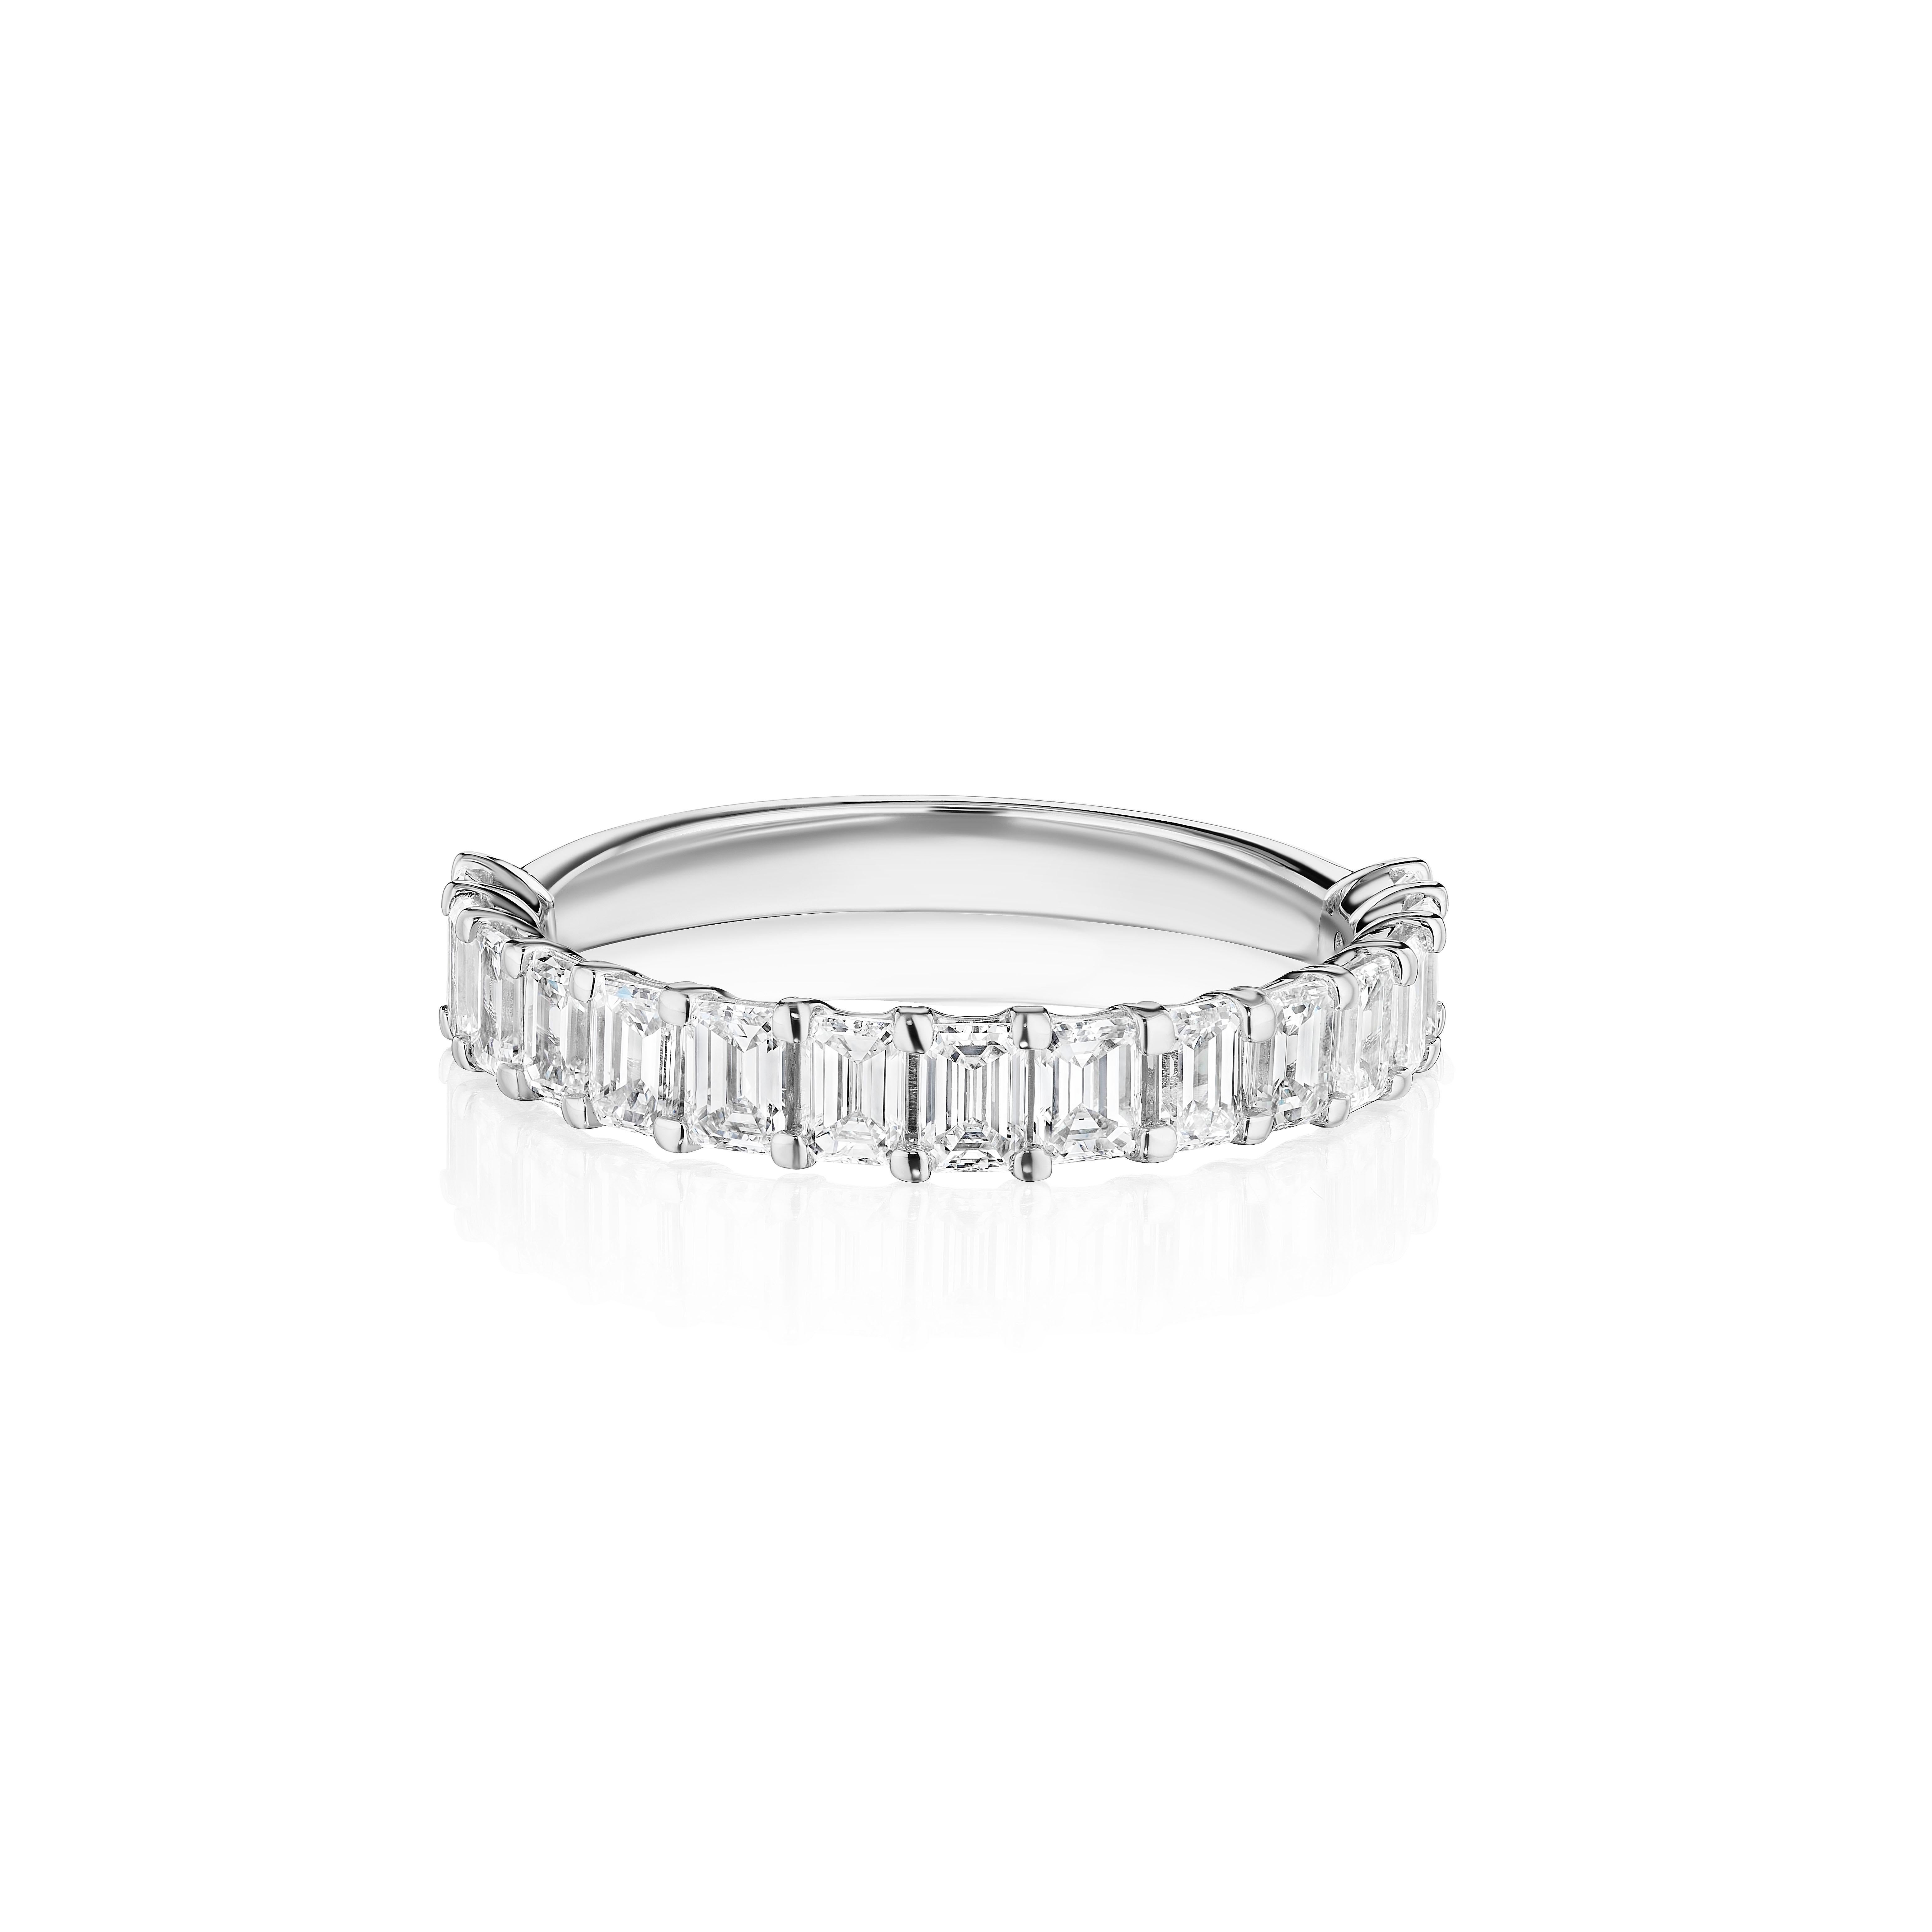 •	Crafted in 18KT gold, this band is made with 15 emerald cut diamonds, and has a combining total weight of approximately 1.50 carats. The diamonds are set in a shared prong cup setting and extend halfway down the band.  Worn beautifully on its own